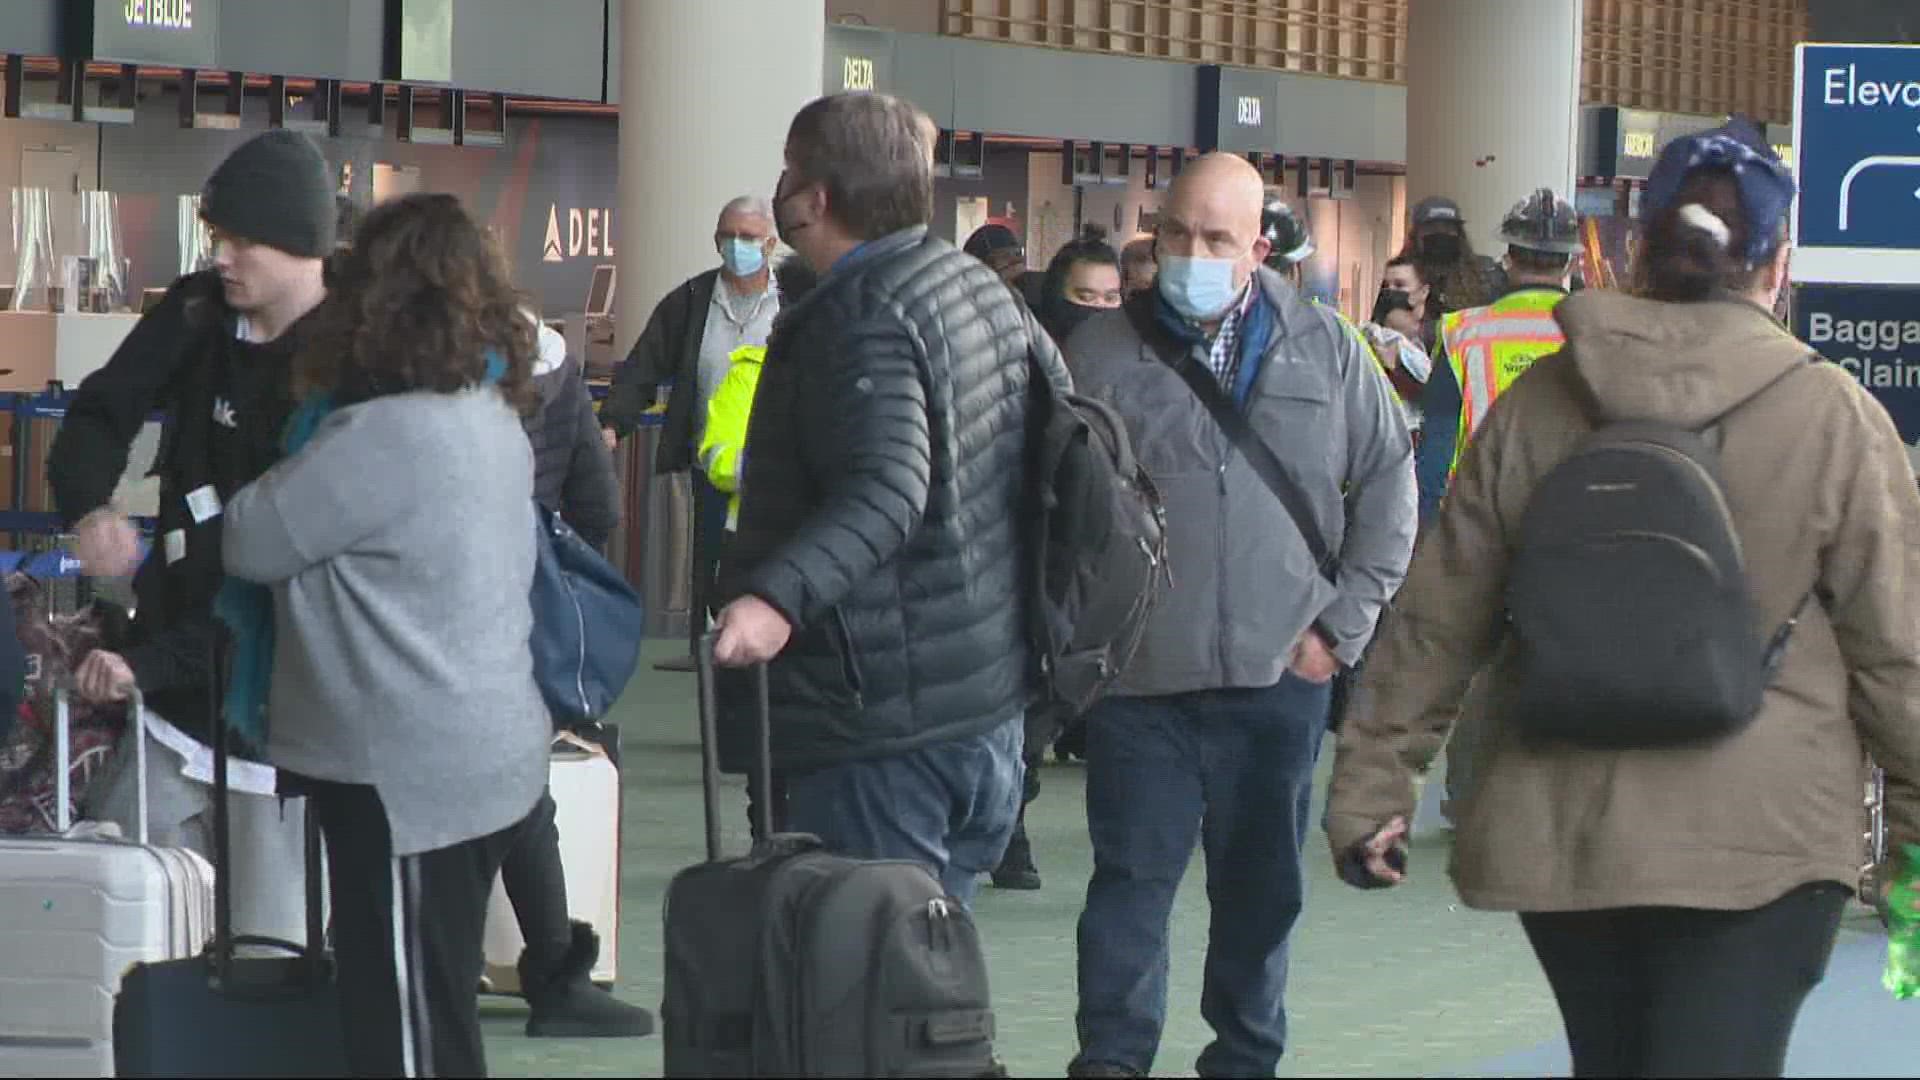 Portland International Airport expects a half million travelers this Thanksgiving weekend. Tuesday and Wednesday are expected to be the busiest days.